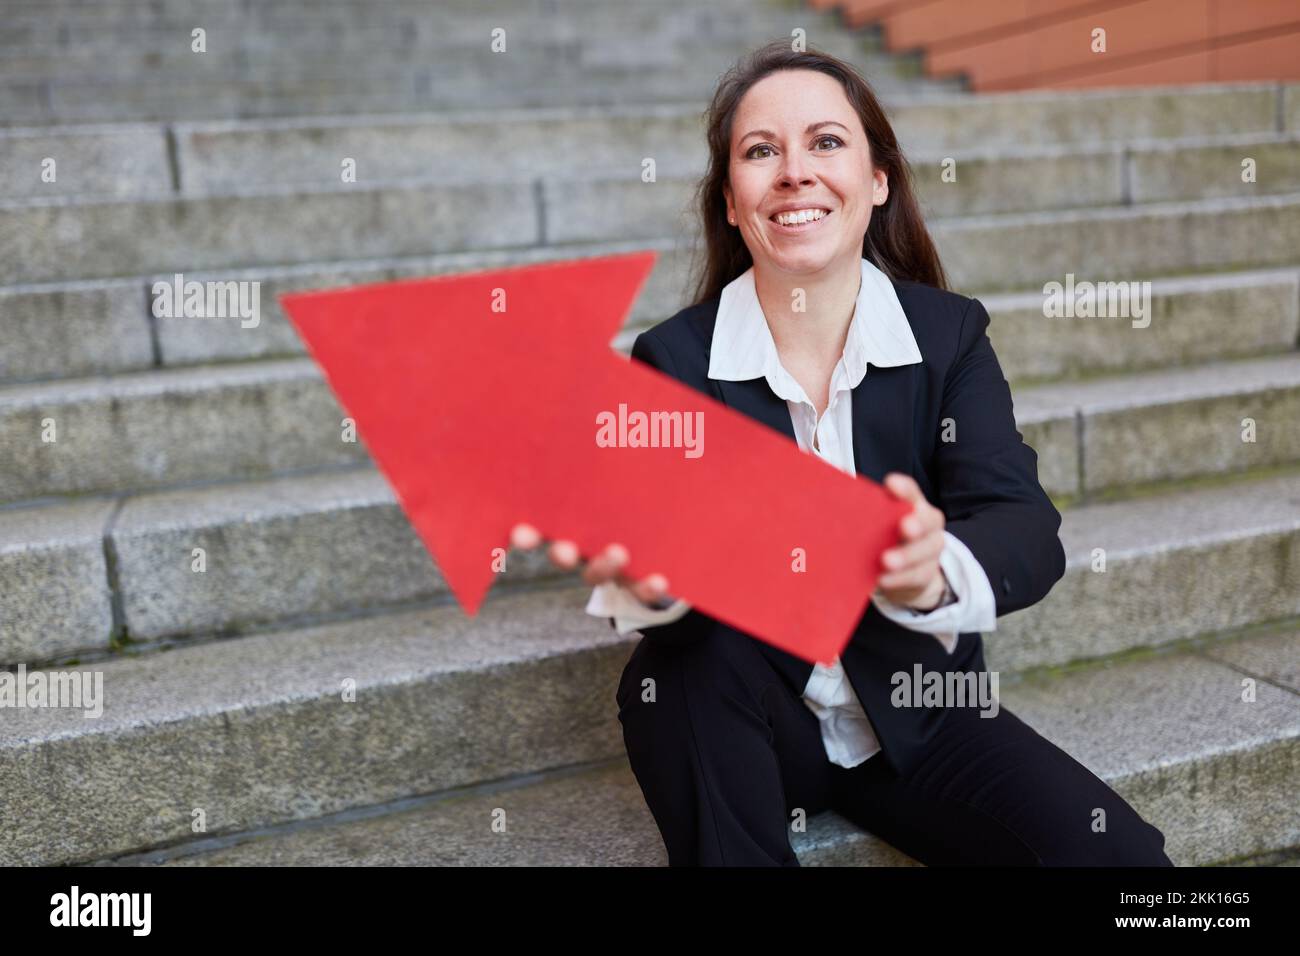 Confident businesswoman holding red arrow symbol as career and success sign Stock Photo